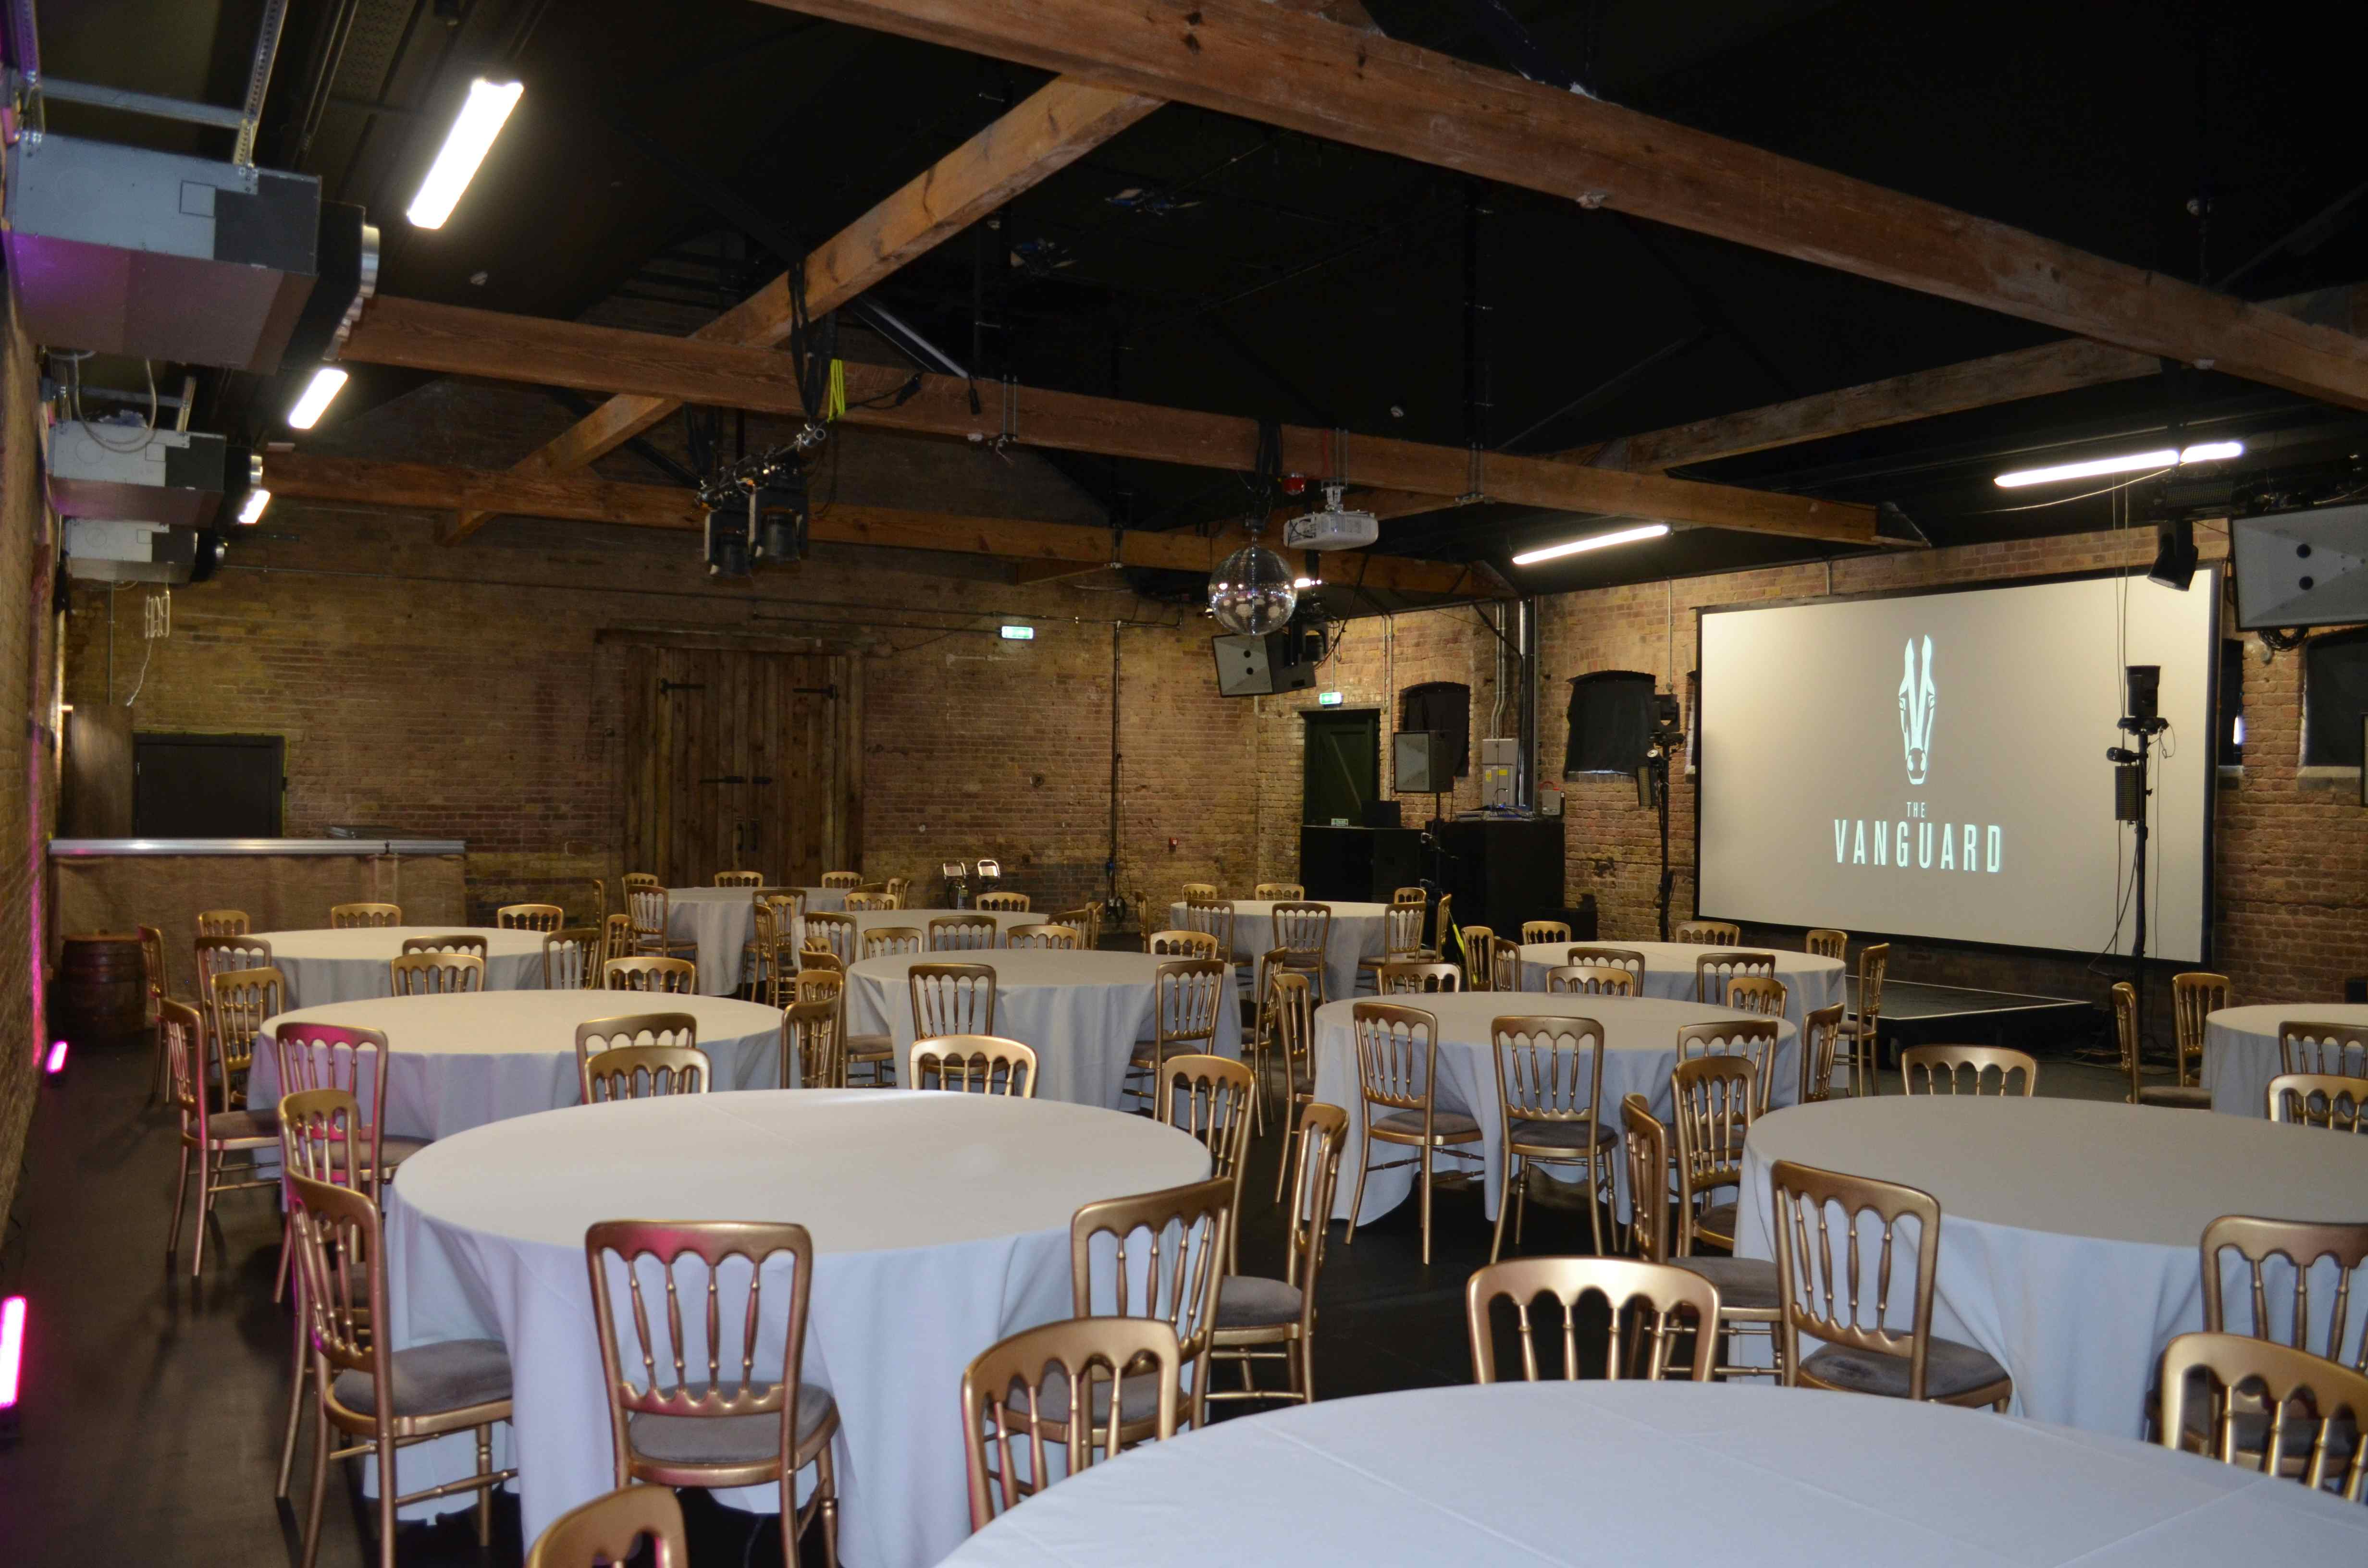 The Warehouse, The Vanguard - Event Space